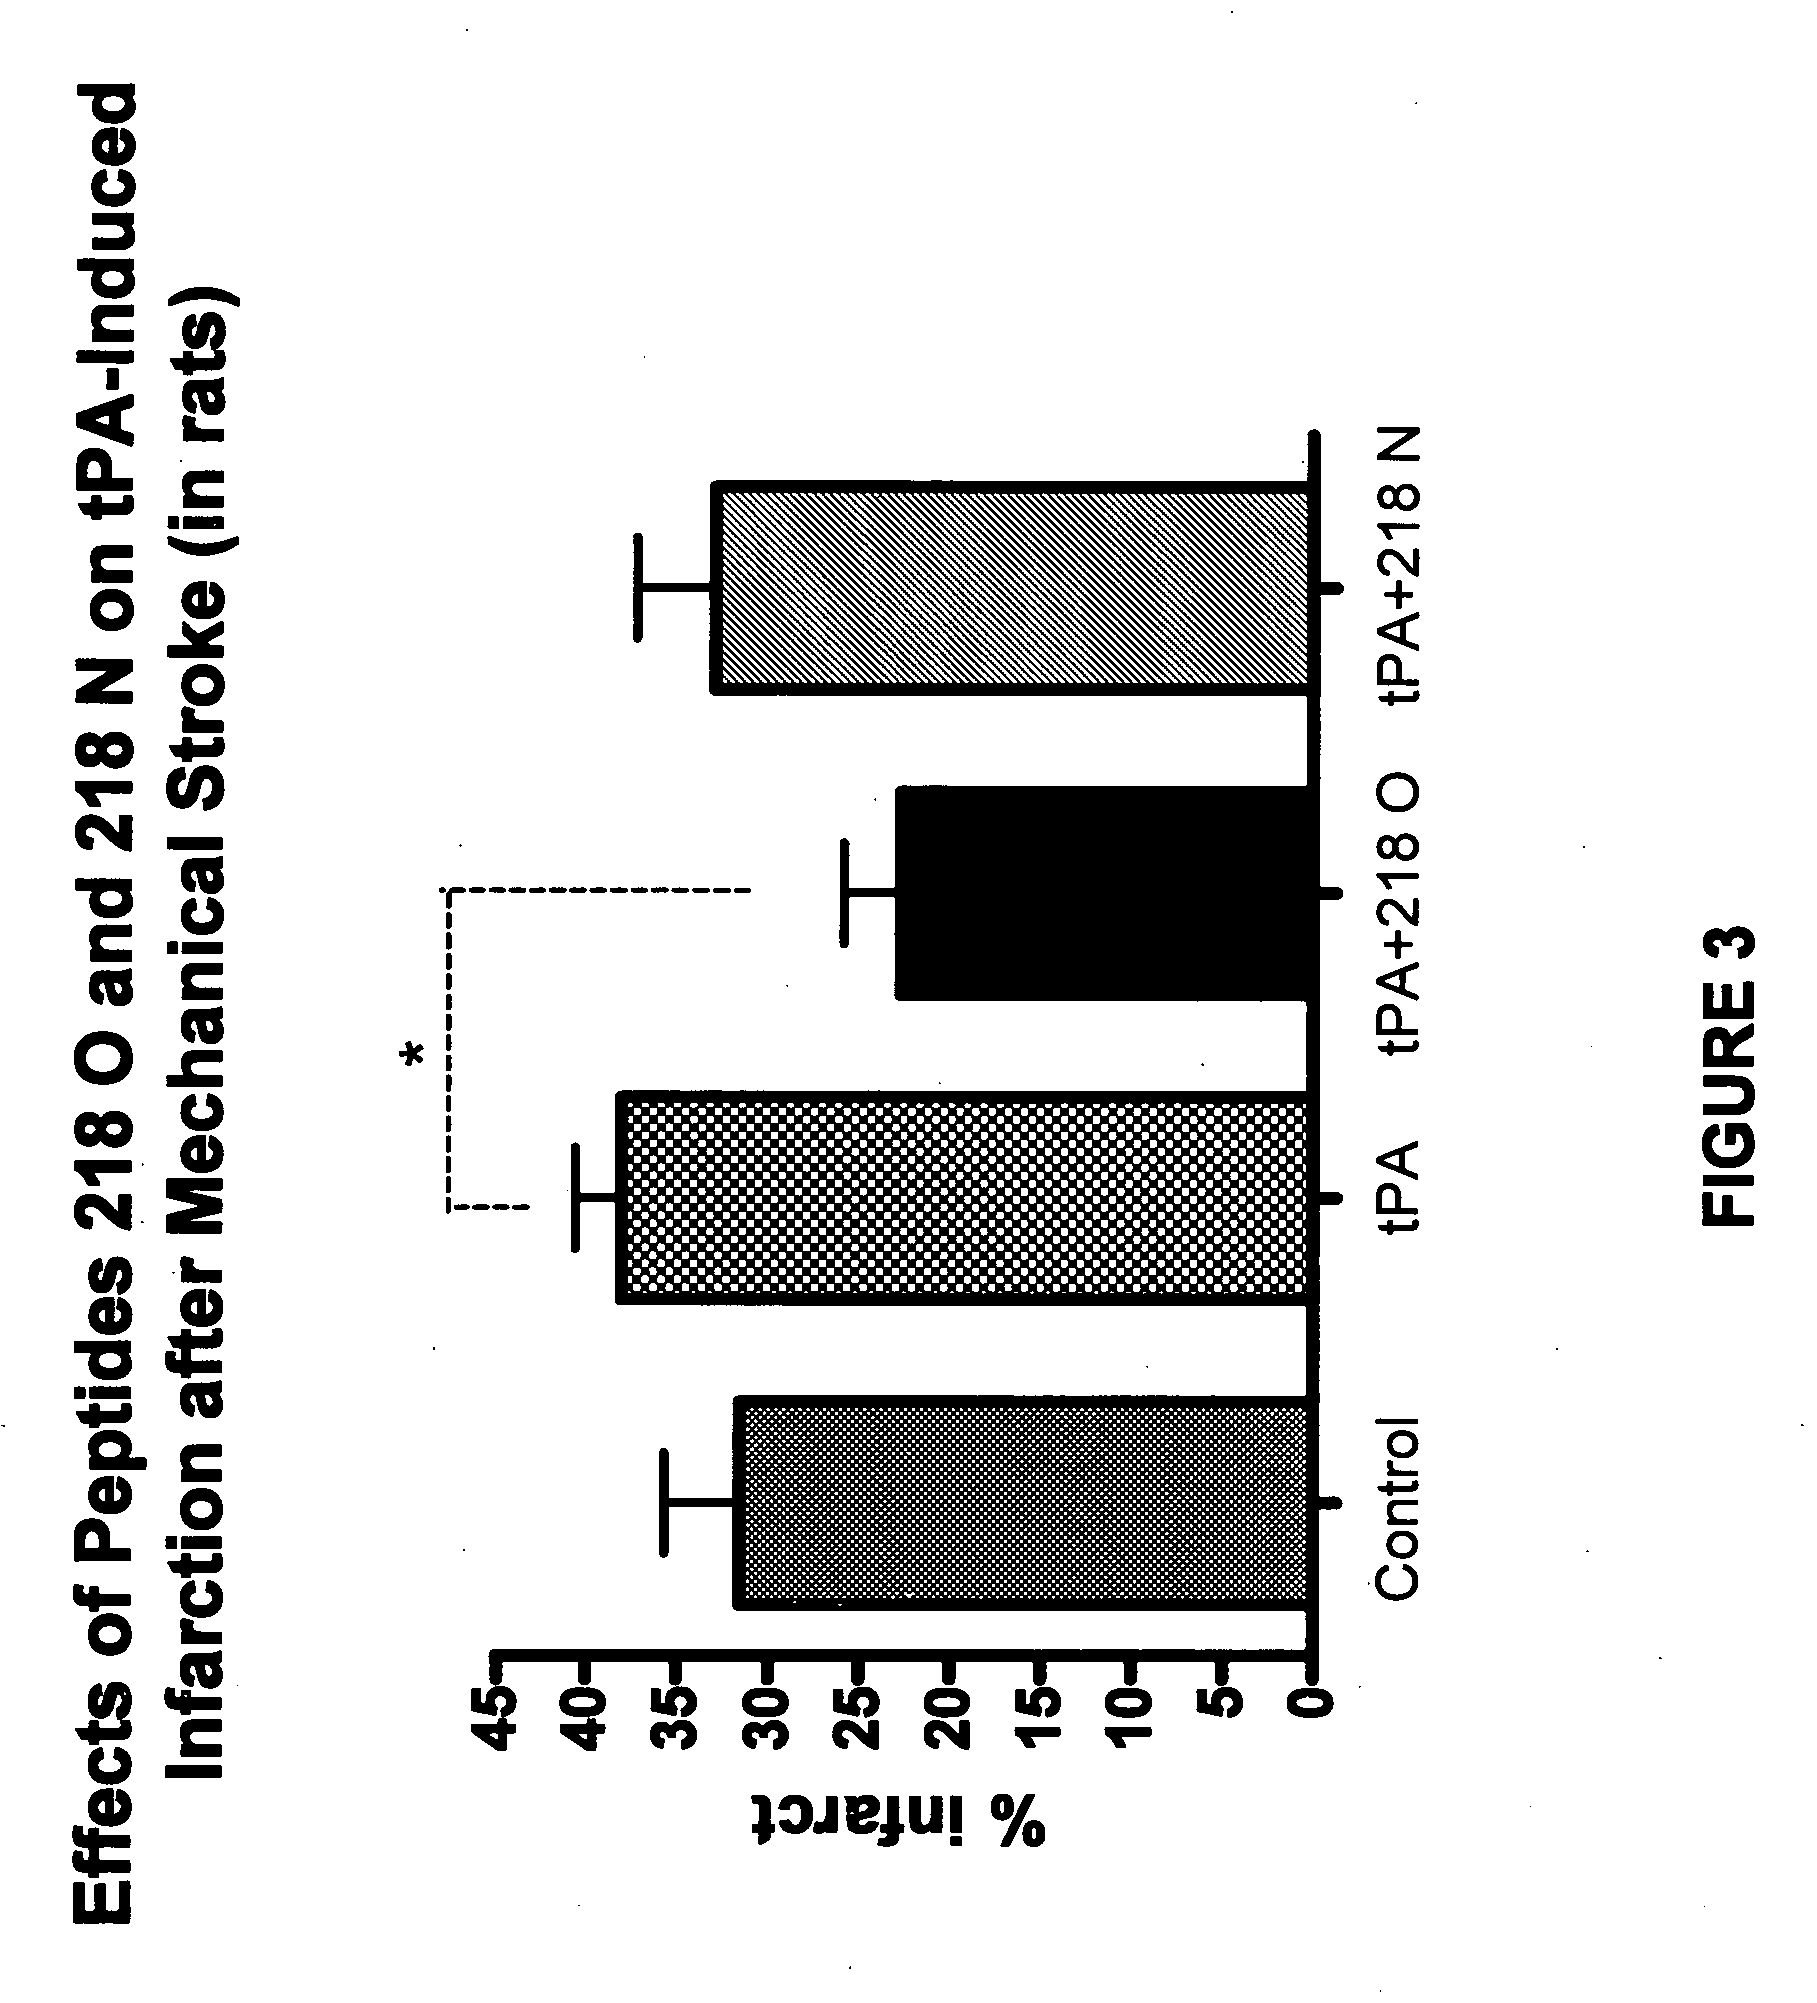 Peptides derived from plasminogen activator inhibitor-1 and uses thereof